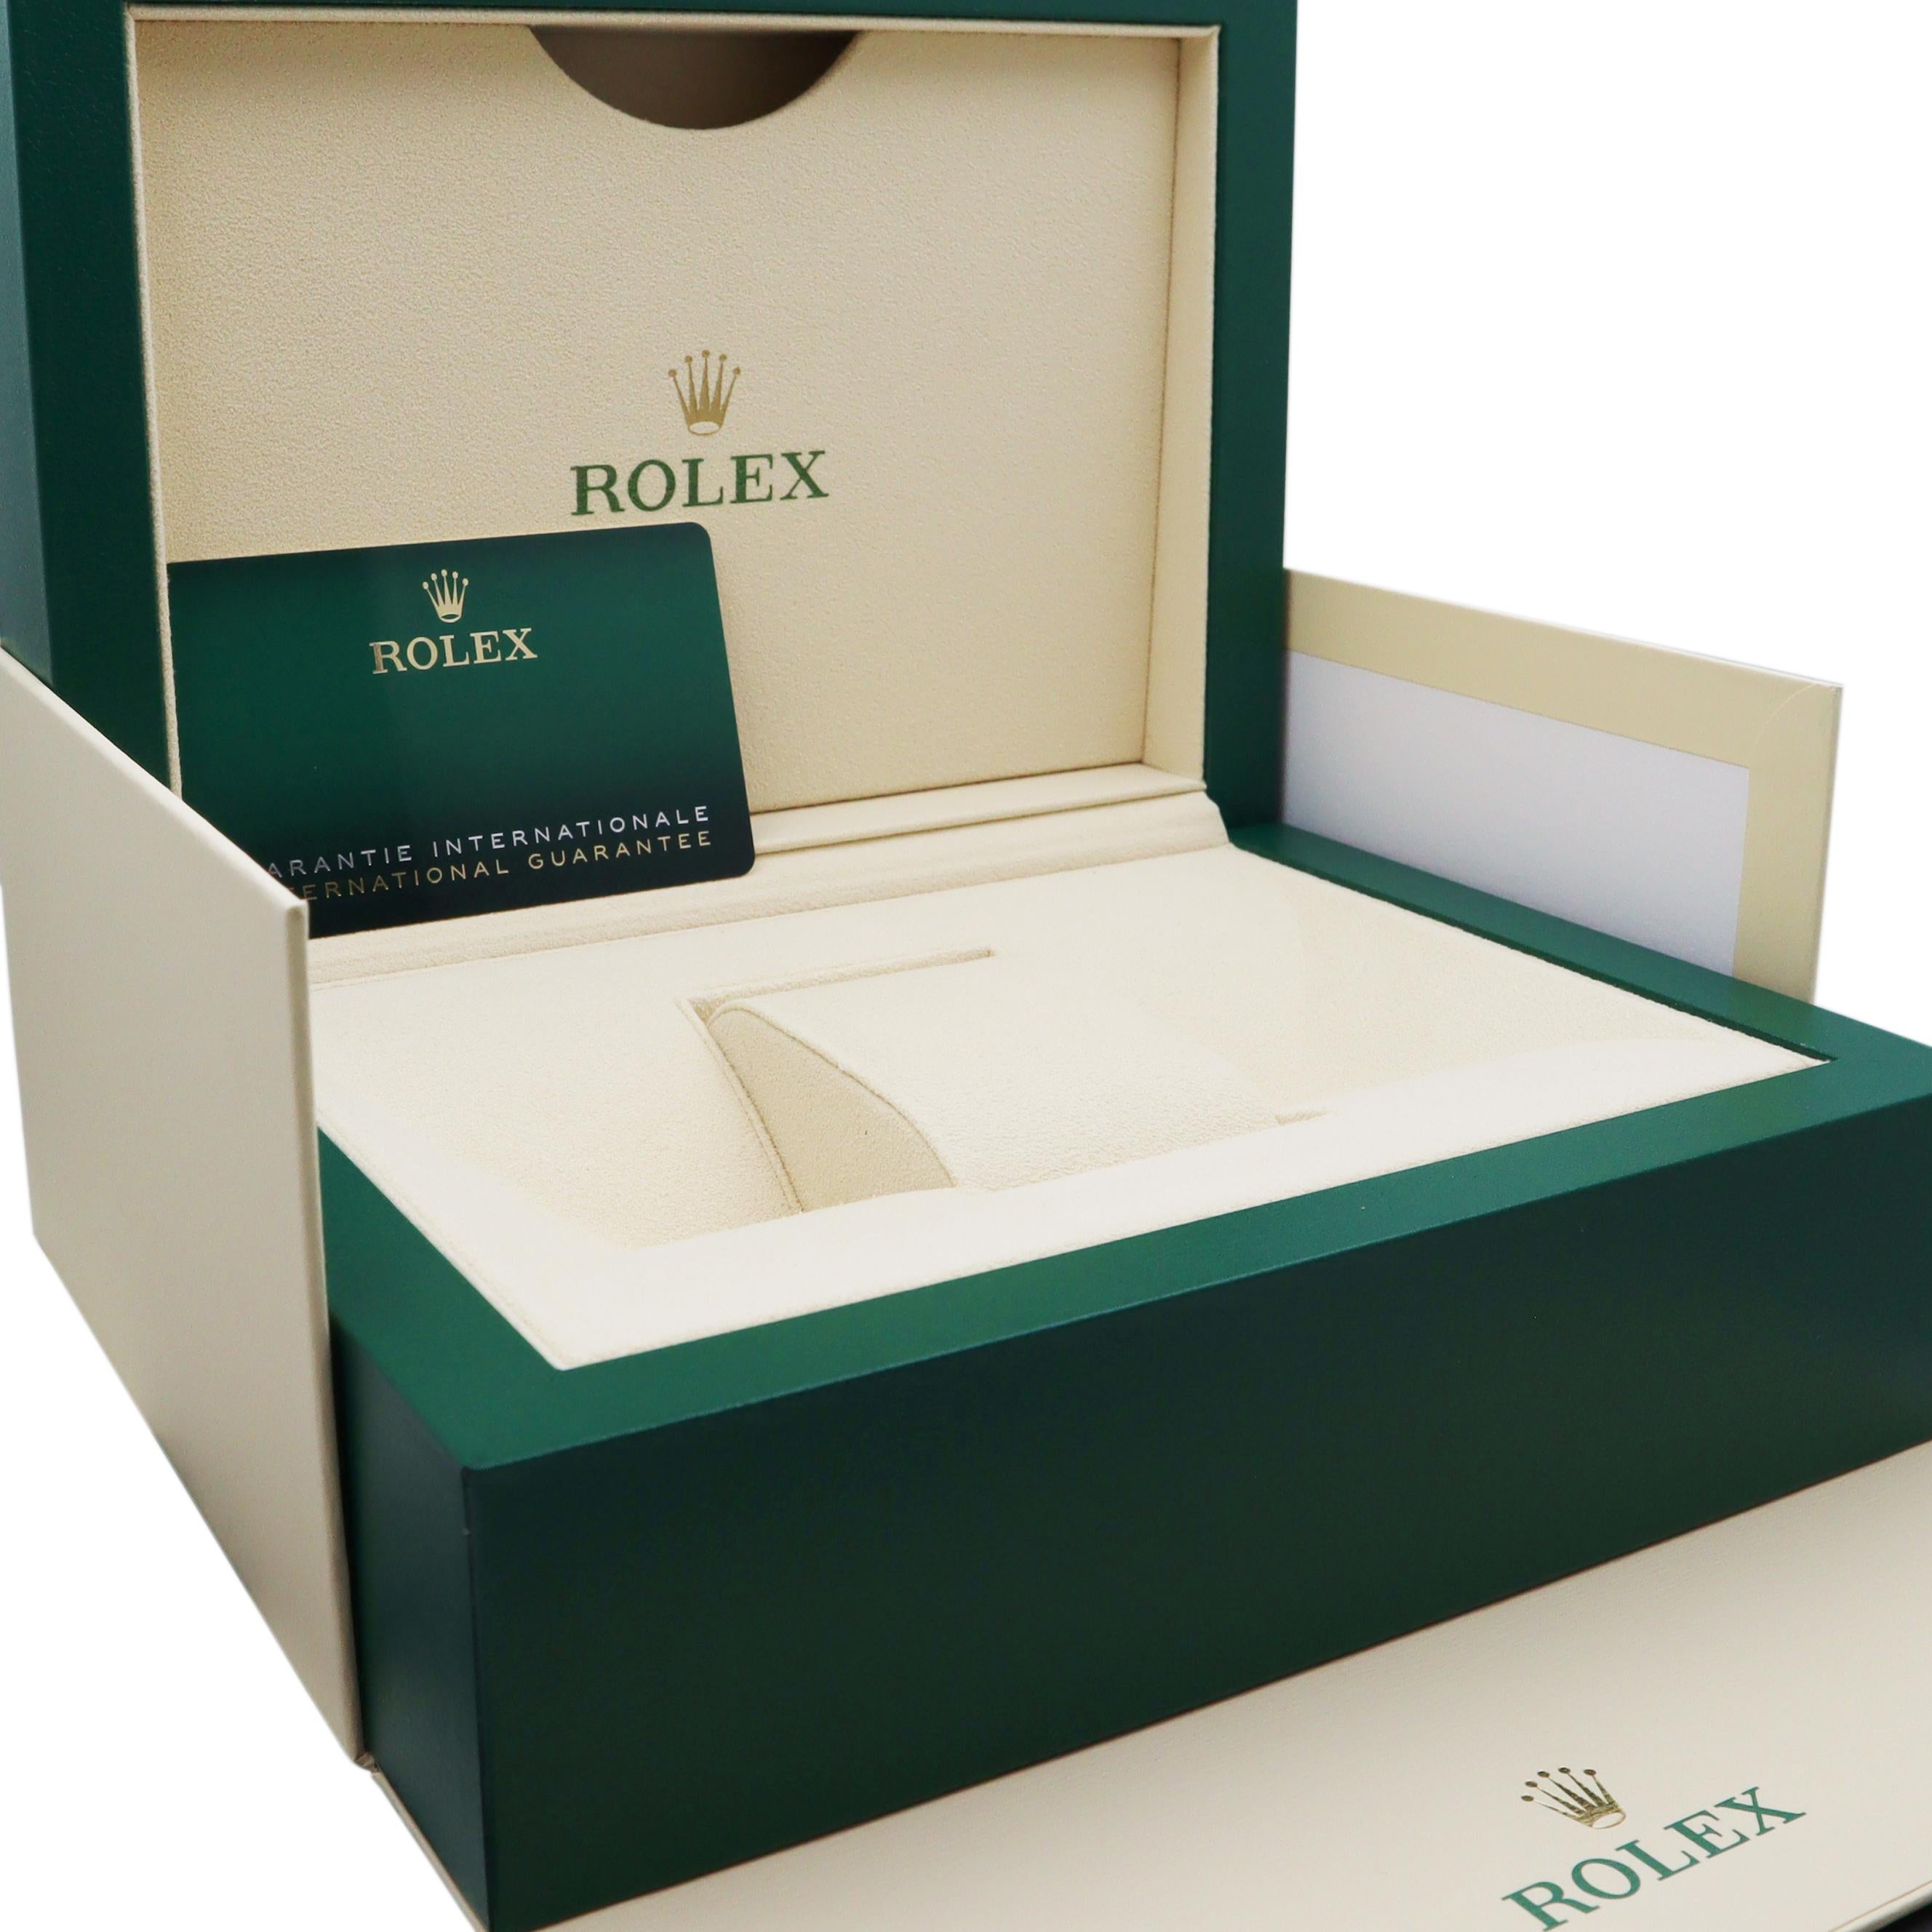 Brand new Rolex Datejust 41mm Steel Blue Index Dial Jubilee Bracelet Smooth Bezel Automatic Mens Watch. Original Box and Papers are Included. Covered by 3-year Chronostore Warranty.
Brand Rolex
Type Wristwatch
Department Men
Model Number